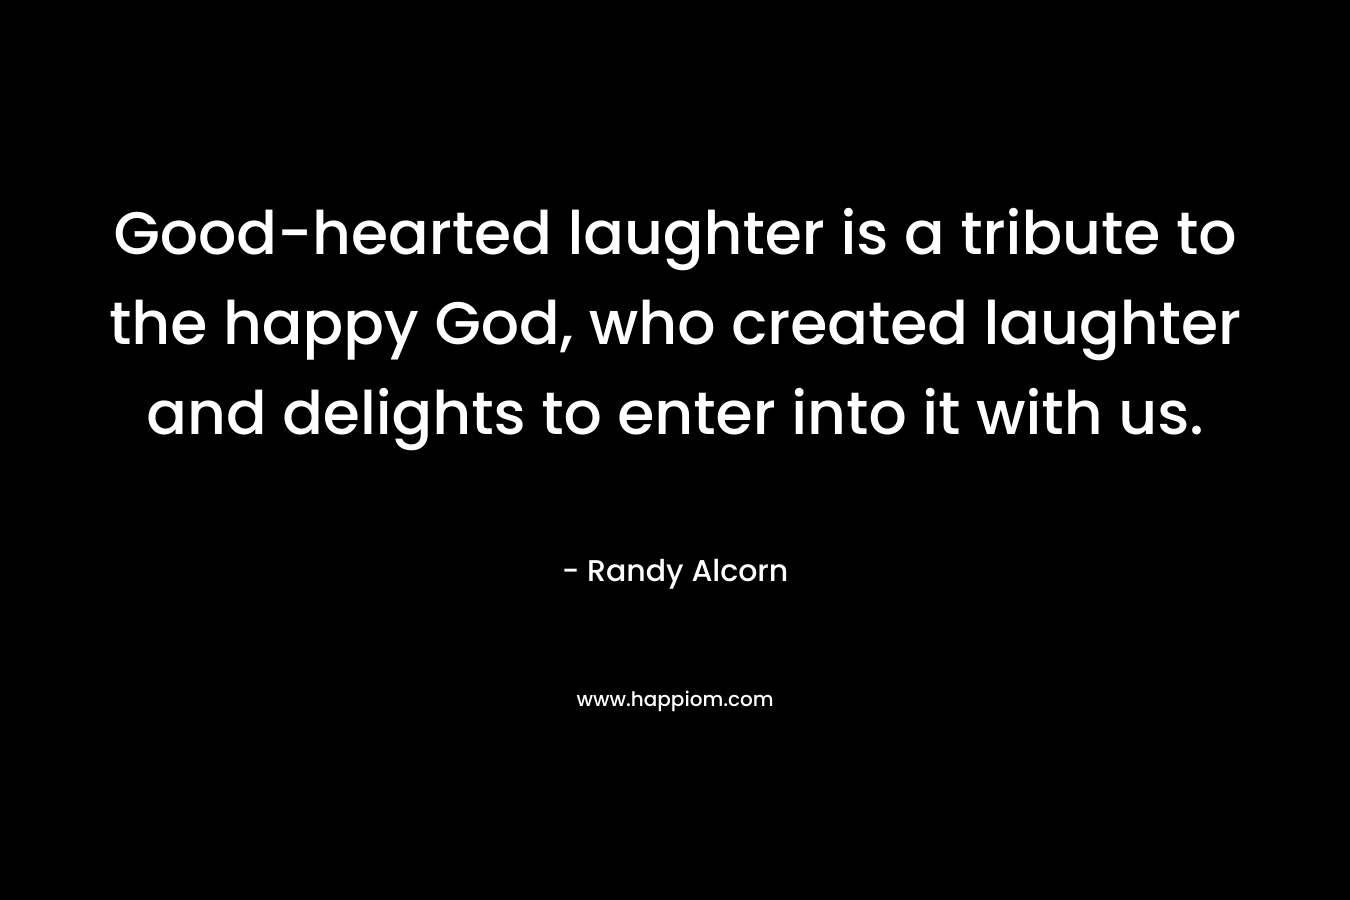 Good-hearted laughter is a tribute to the happy God, who created laughter and delights to enter into it with us.